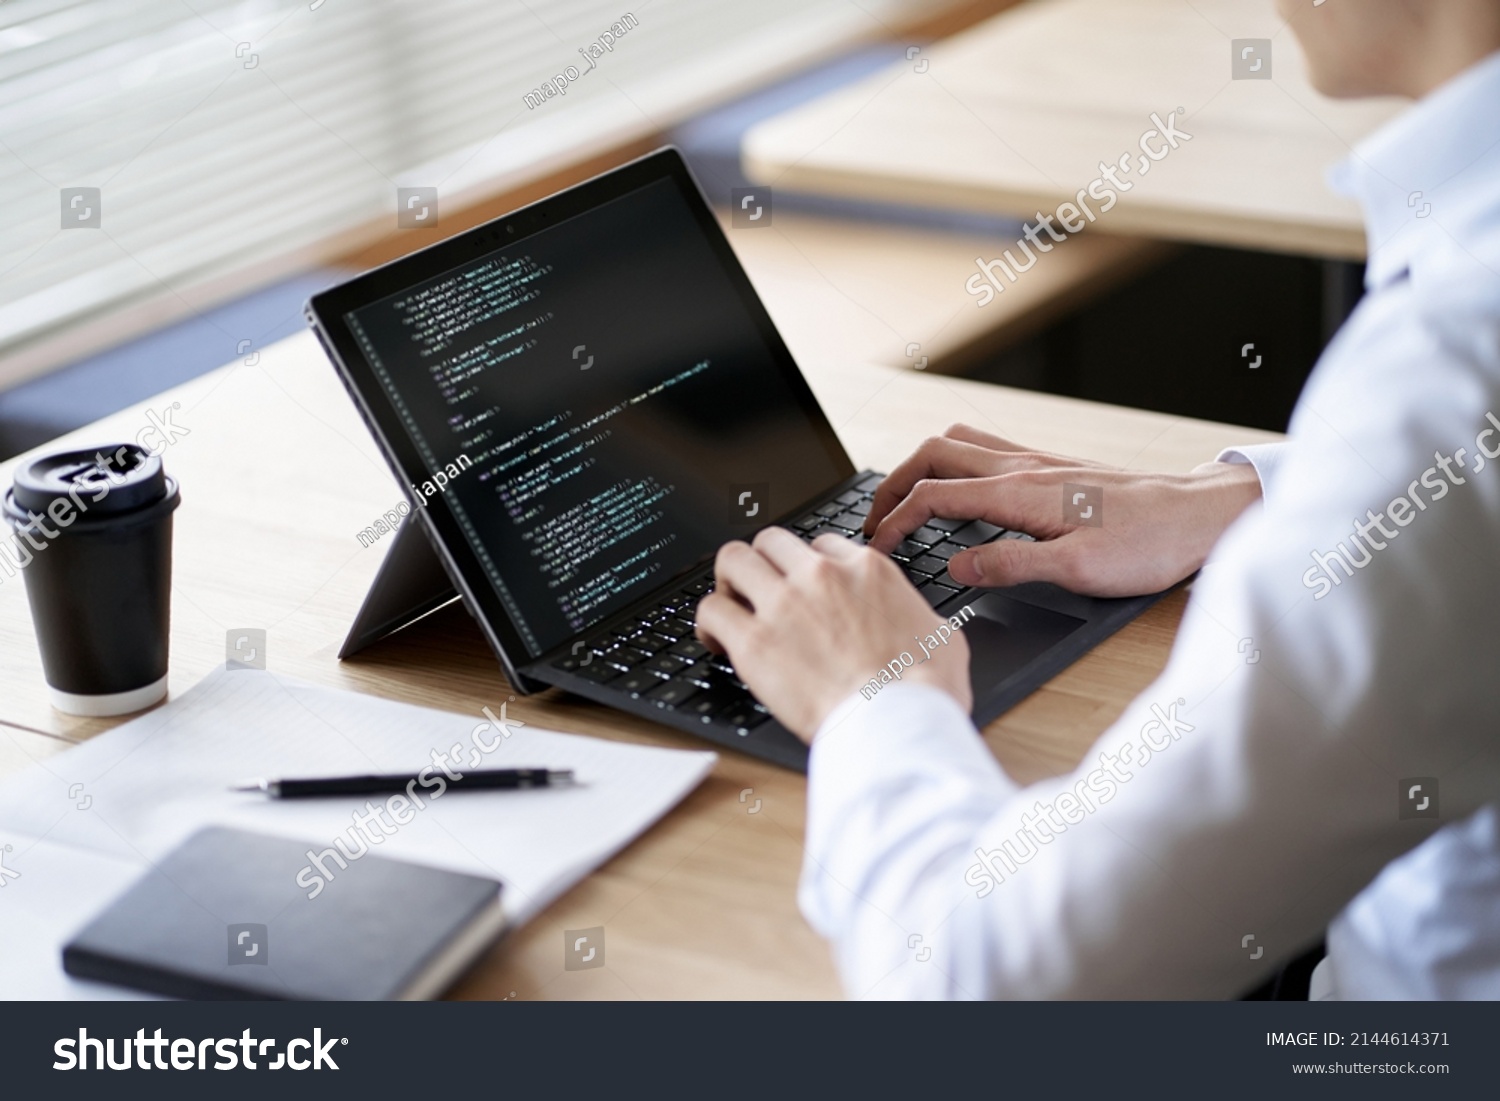 Asian programmer writing code on a laptop #2144614371